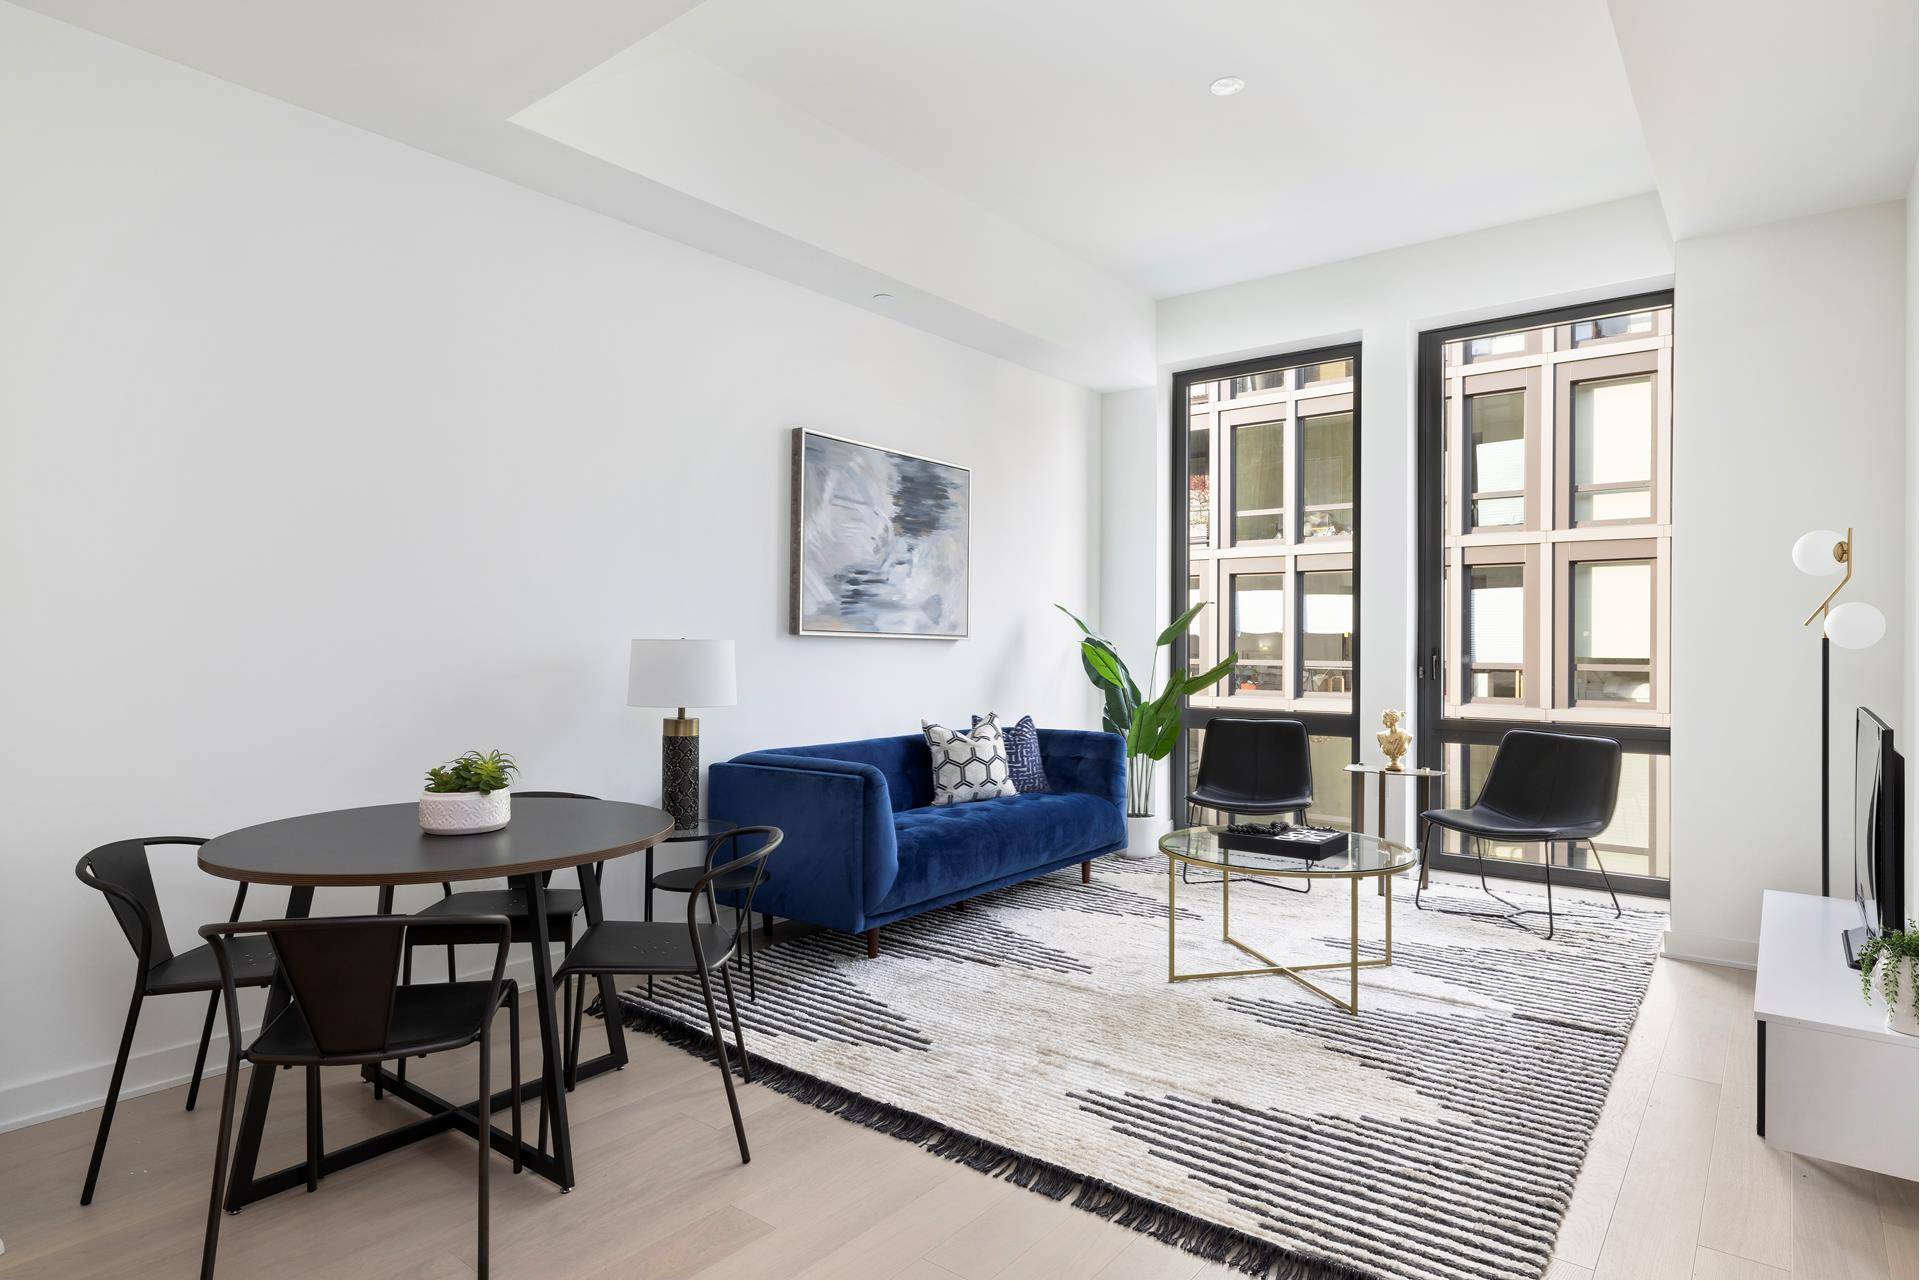 Stunning 1 Bedroom for Sale at 77 Charlton Street, Toll Brothers New Construction Condominium located where The West Village and Soho meet.